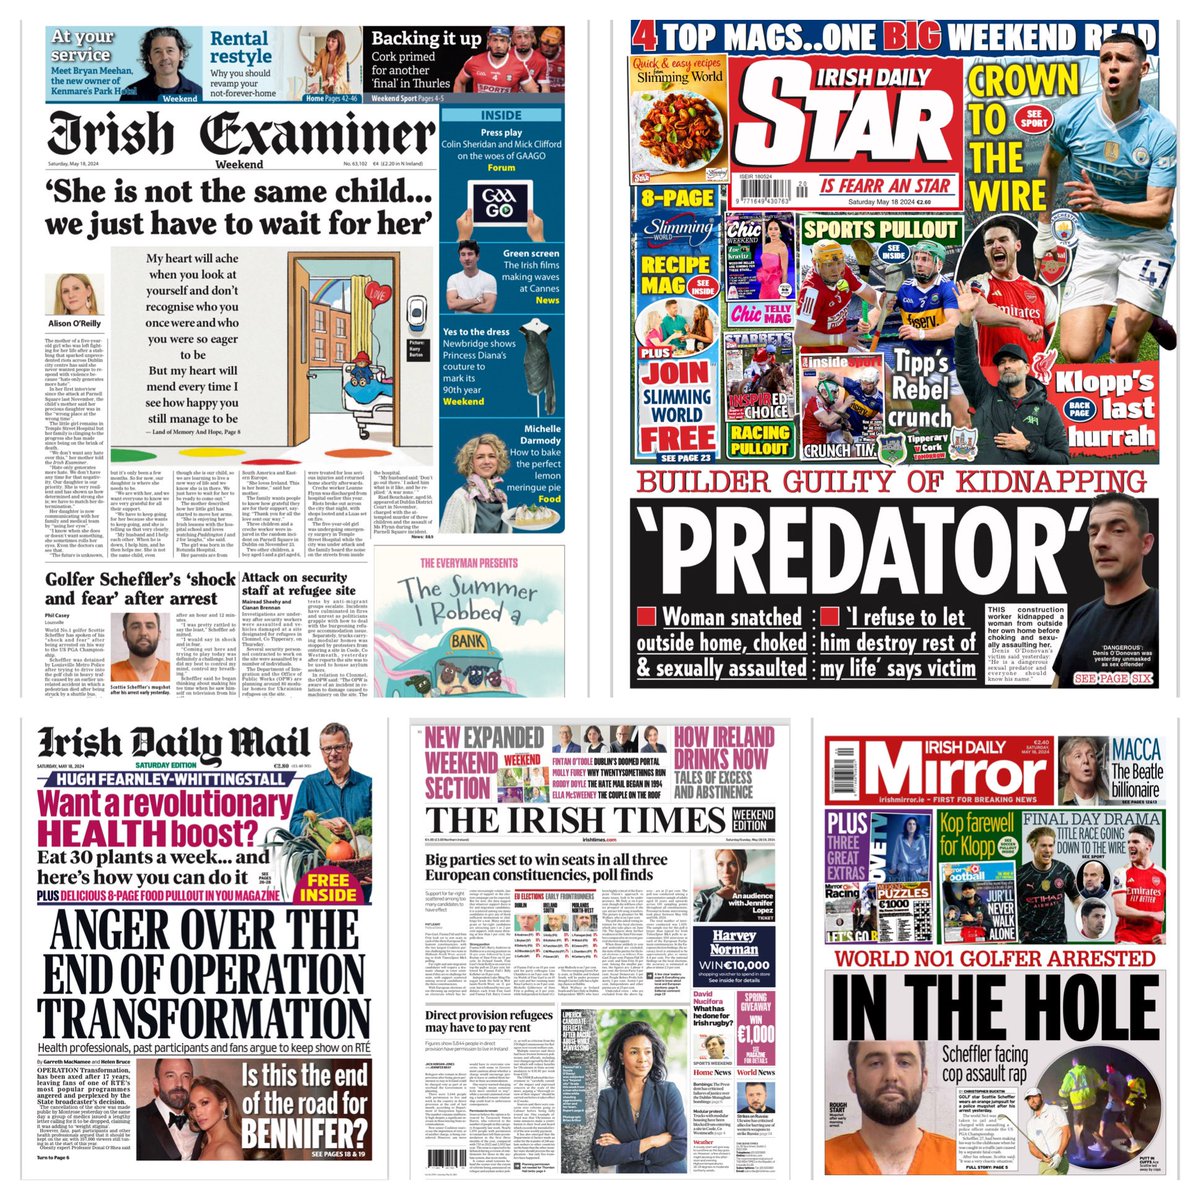 Saturday’s front pages.